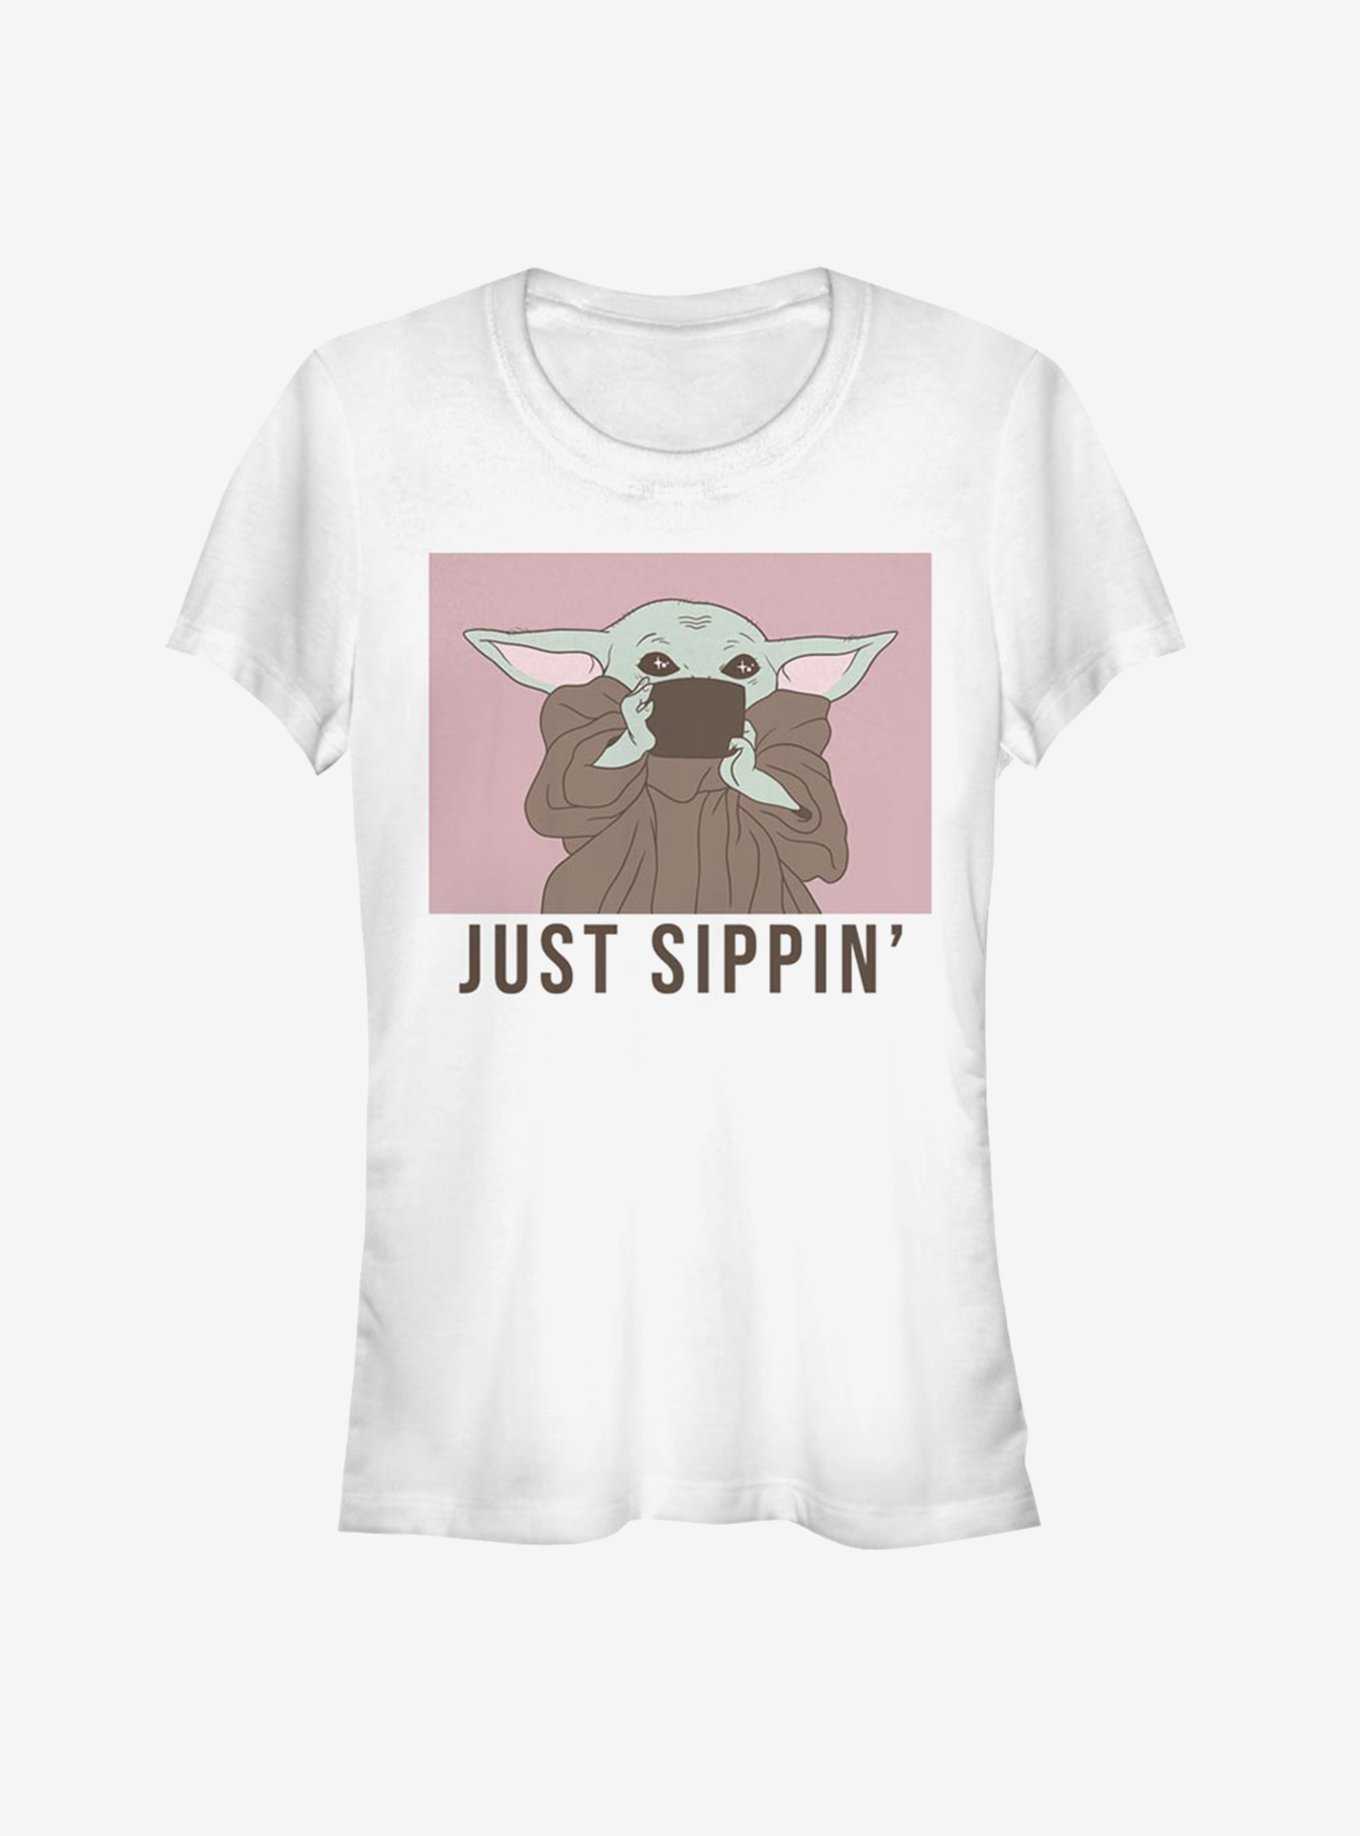 Star Wars The Mandalorian The Child Just Sippin Girls T-Shirt, , hi-res